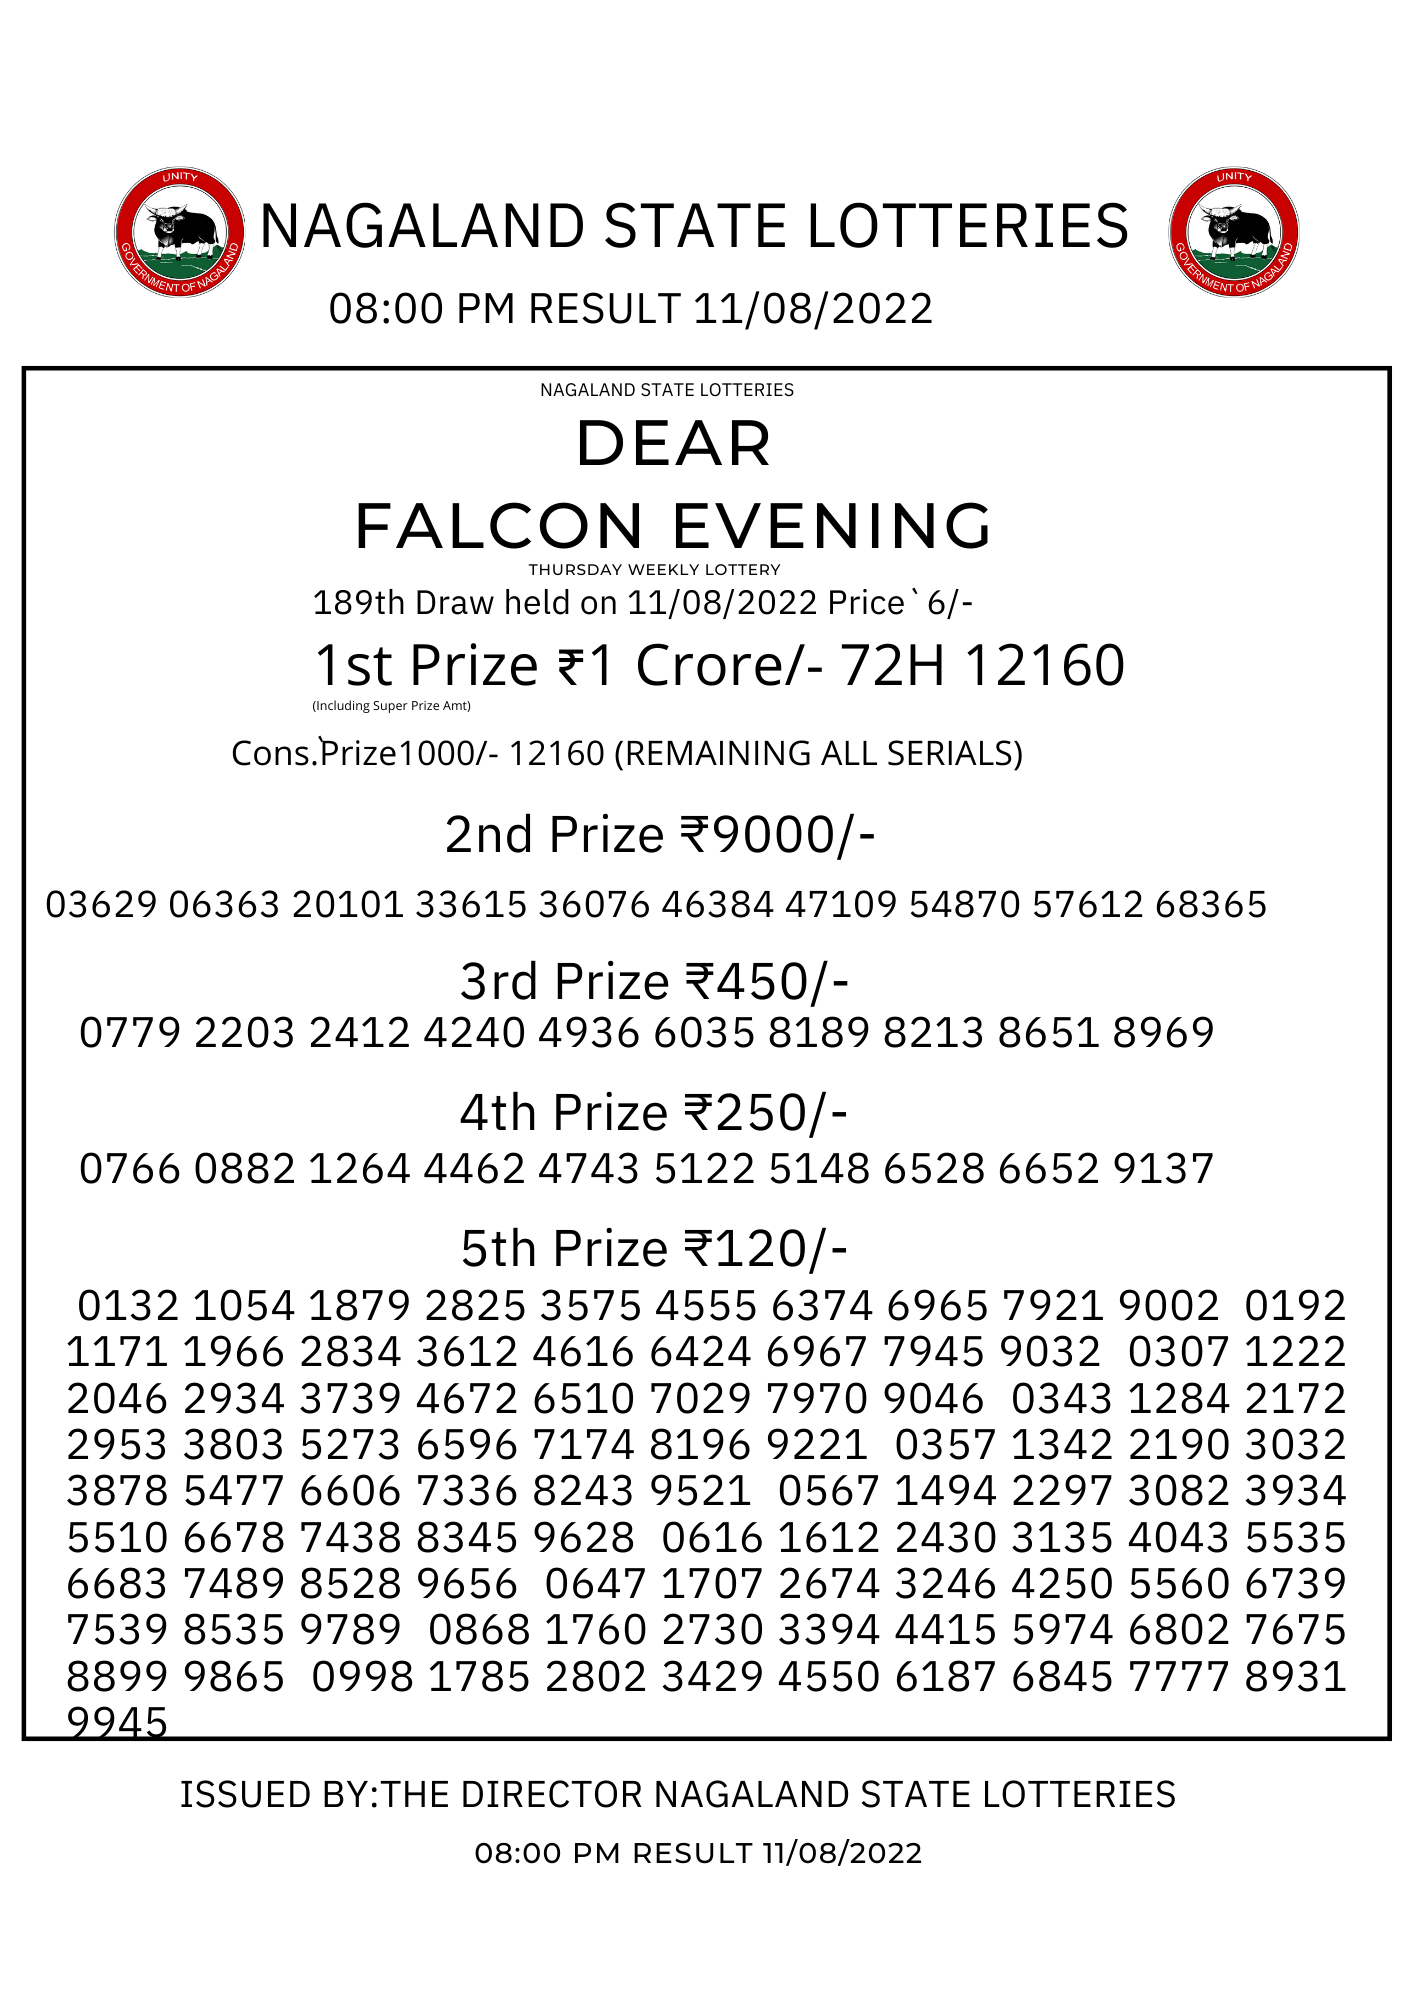 Nagaland Lottery results: Winning numbers of Dear Falcon Evening results